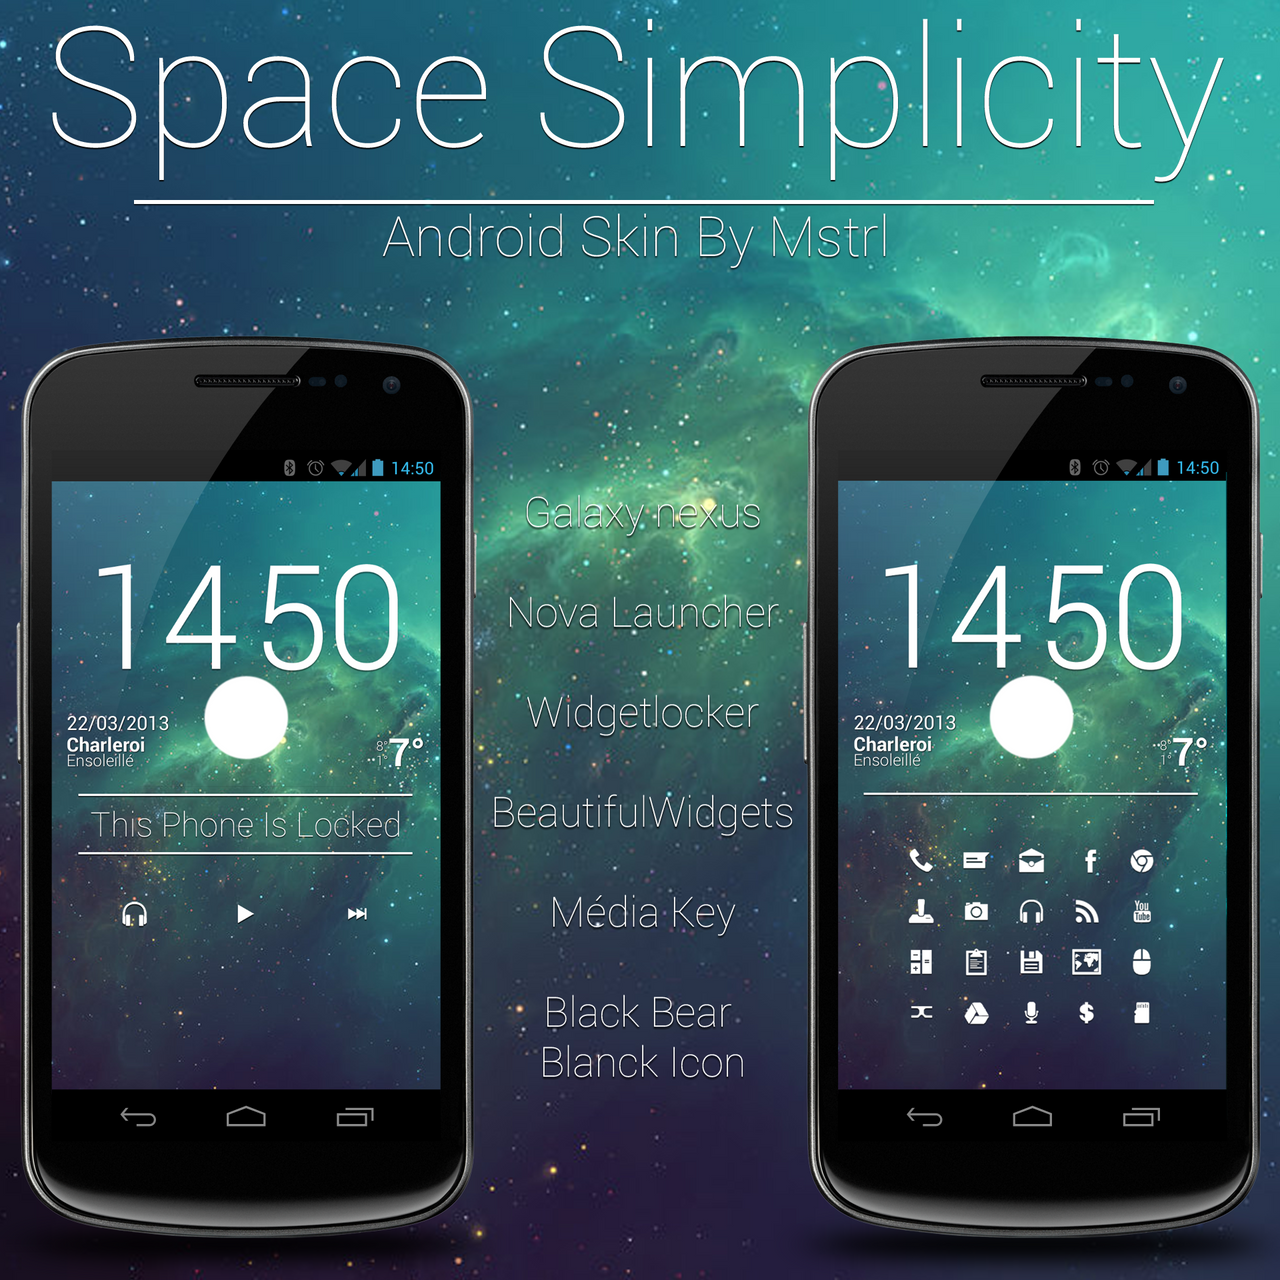 spacesimplicity_by_mstrl-d5yuzt5.png